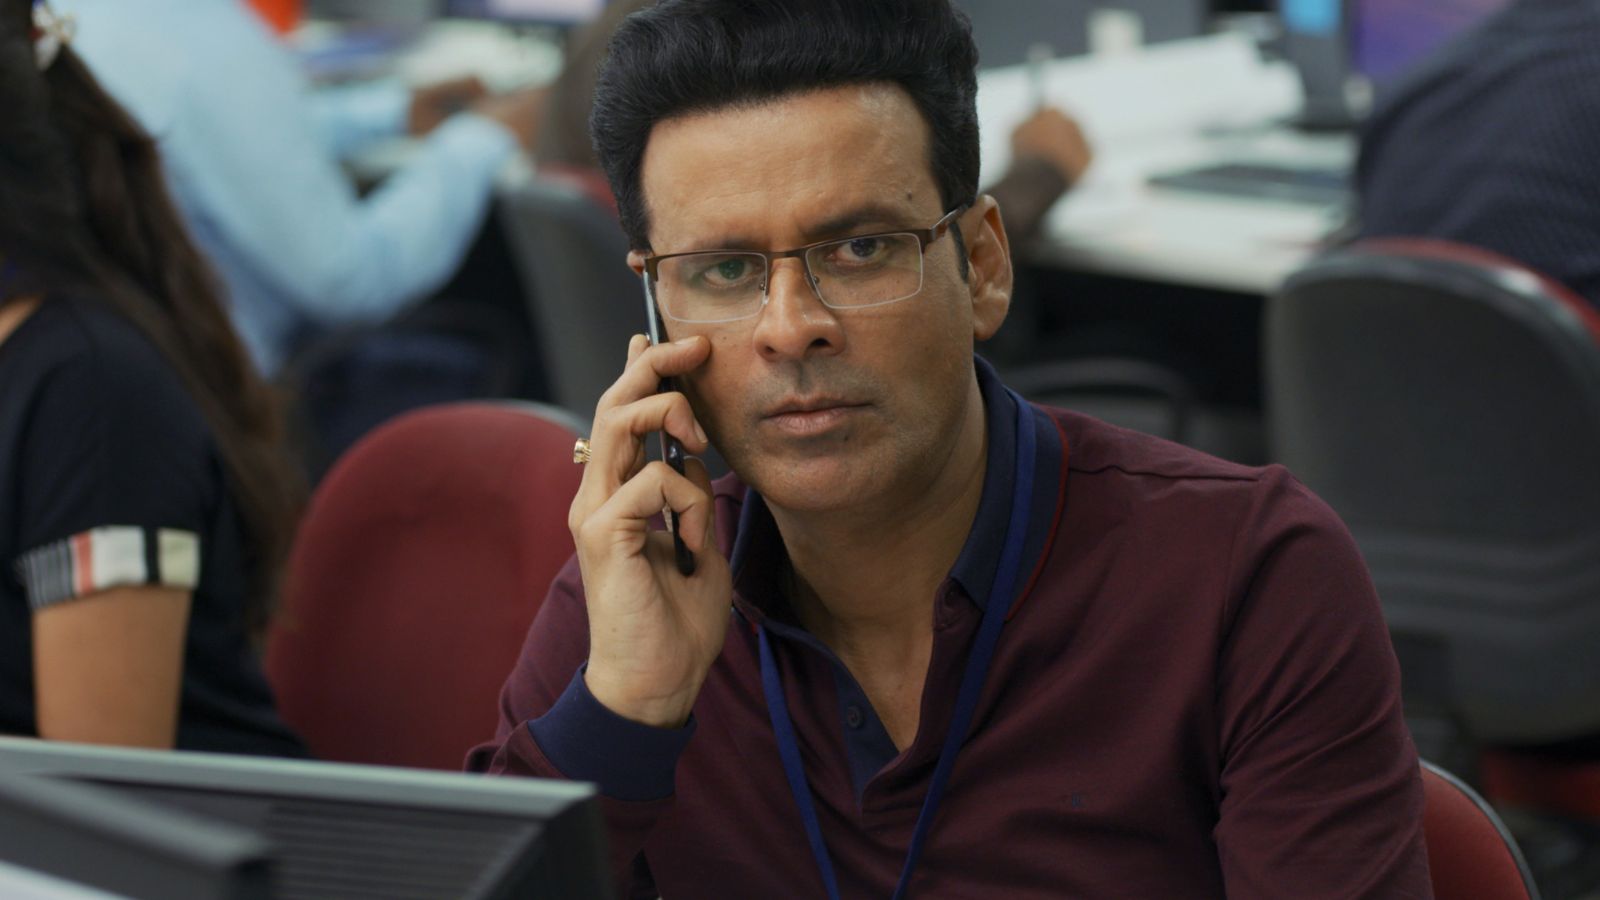 Manoj Bajpayee Shares About The Family Man 3, Says It’ll Be Shot In February In THIS PART OF INDIA; Details